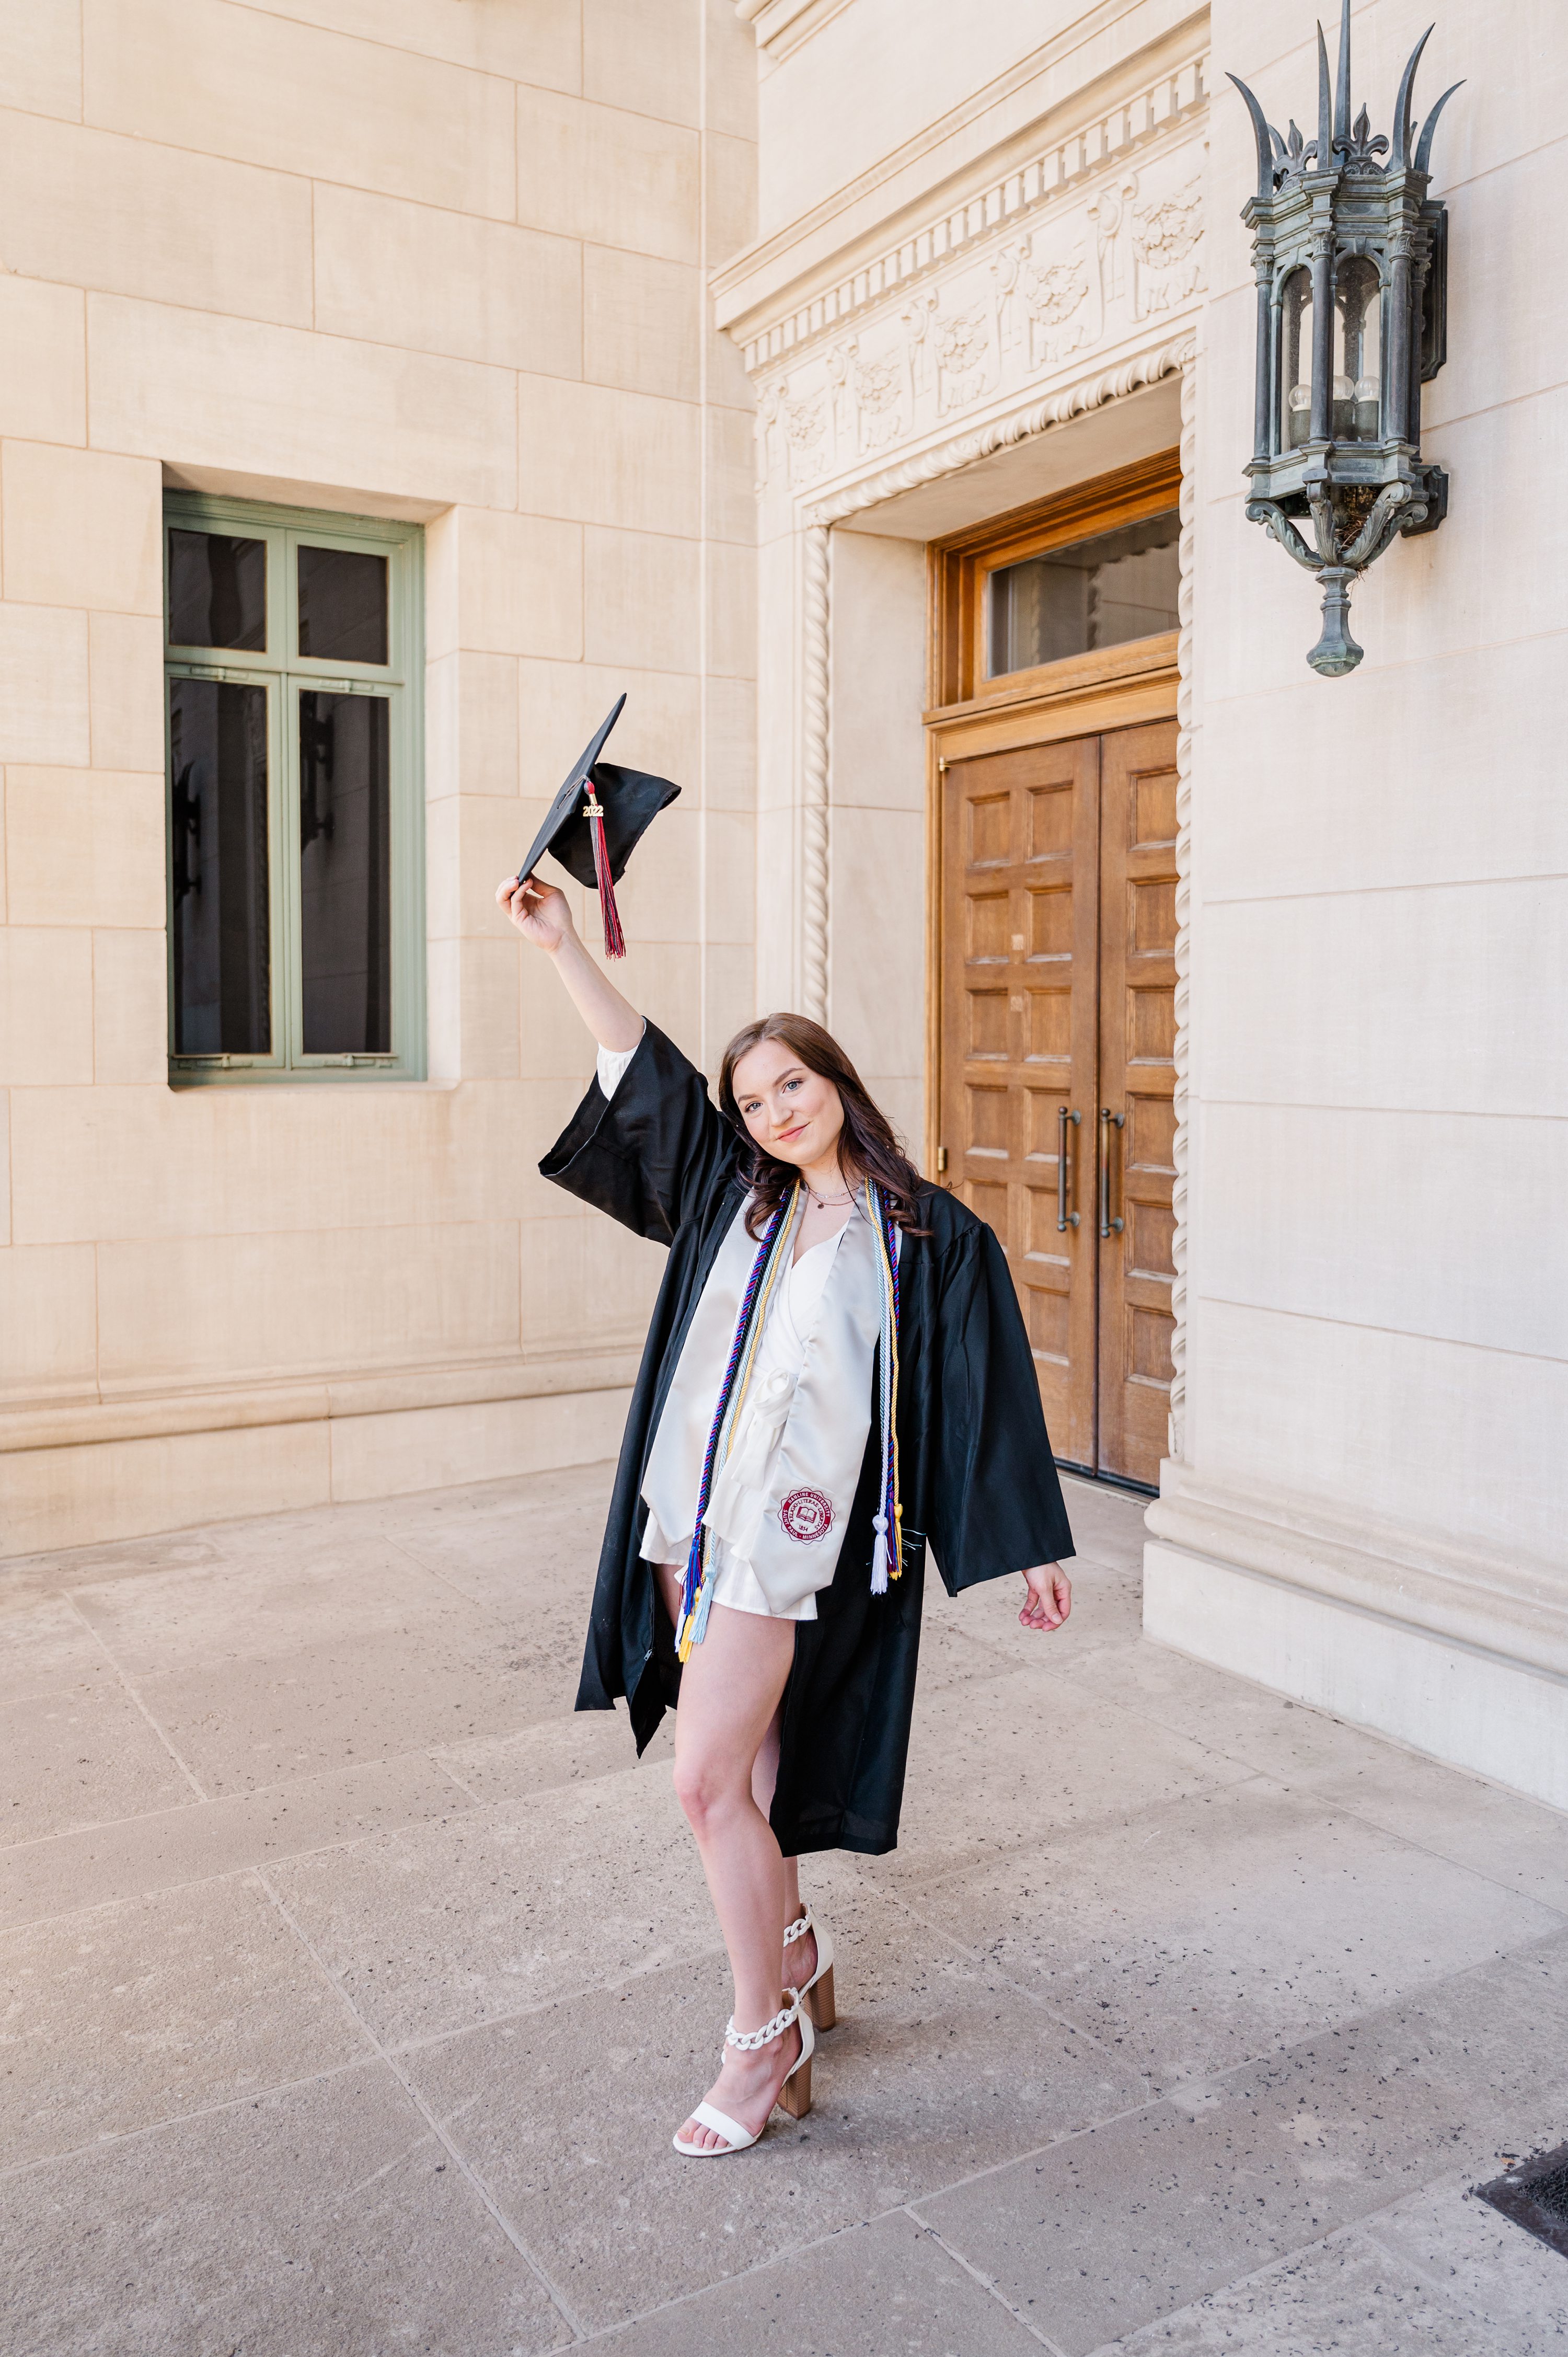 Graduation Photo Ideas for High School and College Grads